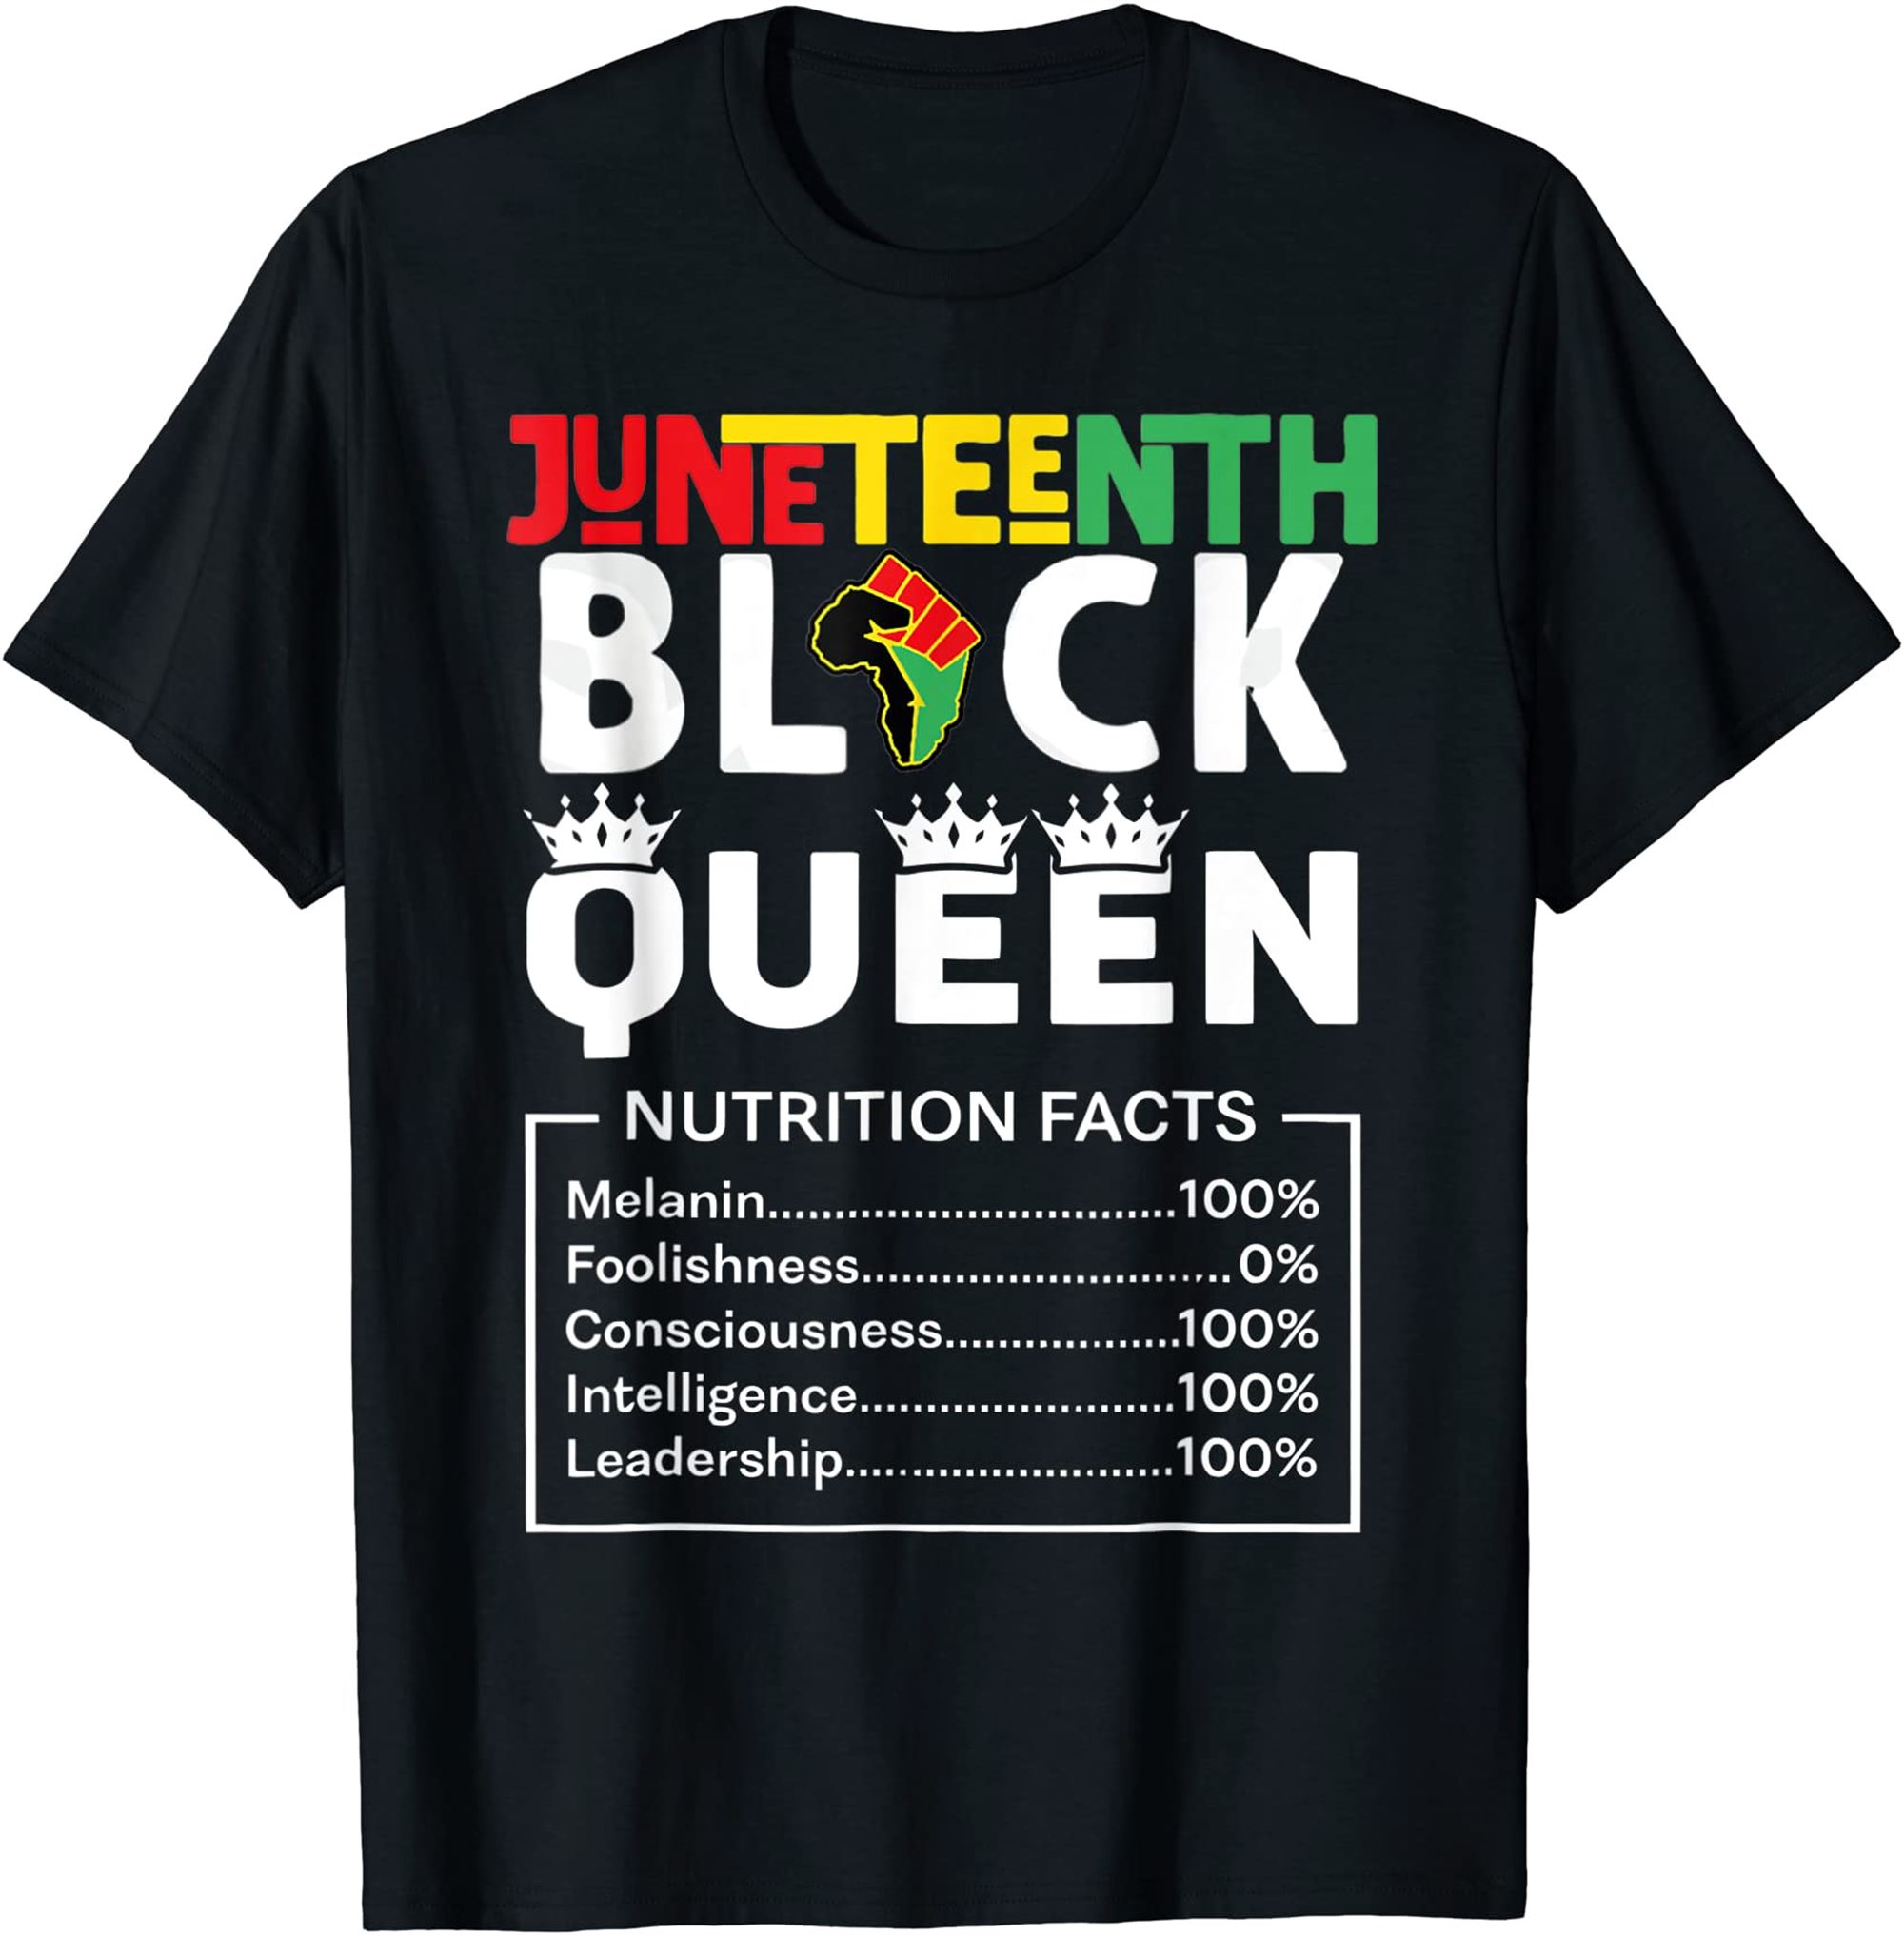 Black Queen Nutritional Facts Black Girl Juneteenth Womens T-shirt Full Size Up To 5xl